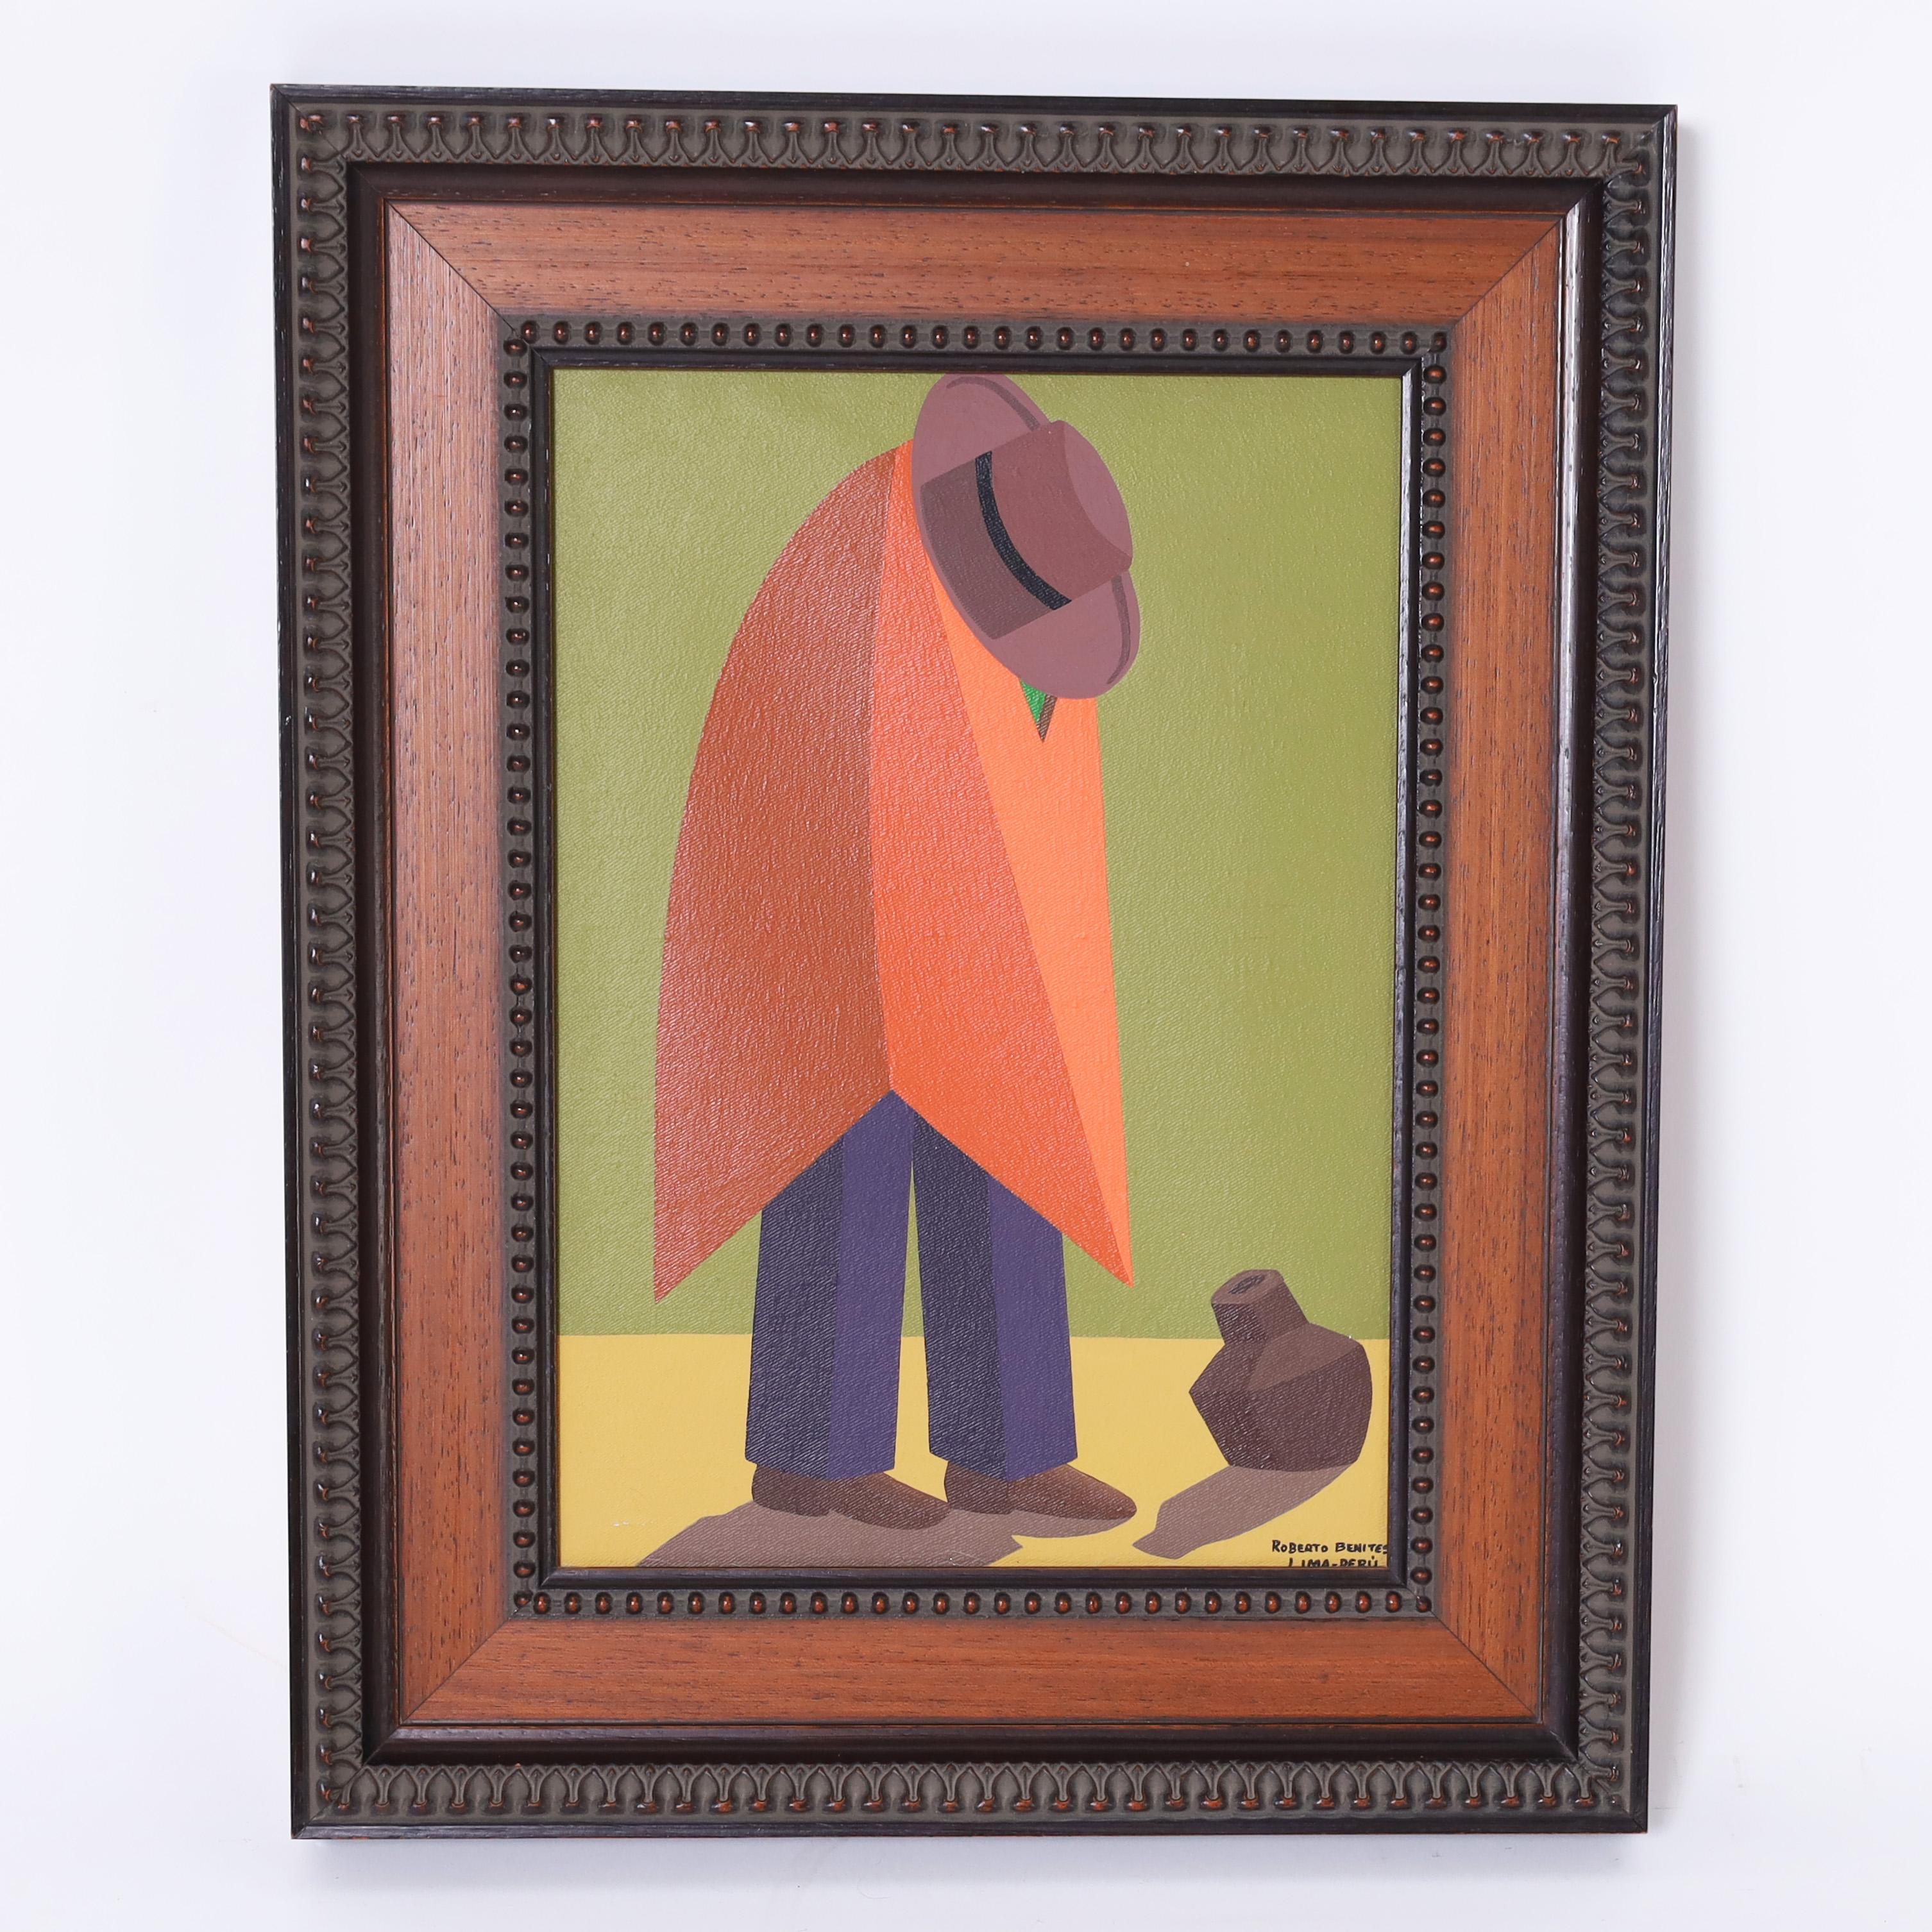 Striking pair of acrylic paintings on canvas of traditional Peruvian figures executed in a modernist minimalist folk style. Signed Roberto Benites and presented in wood frames. 